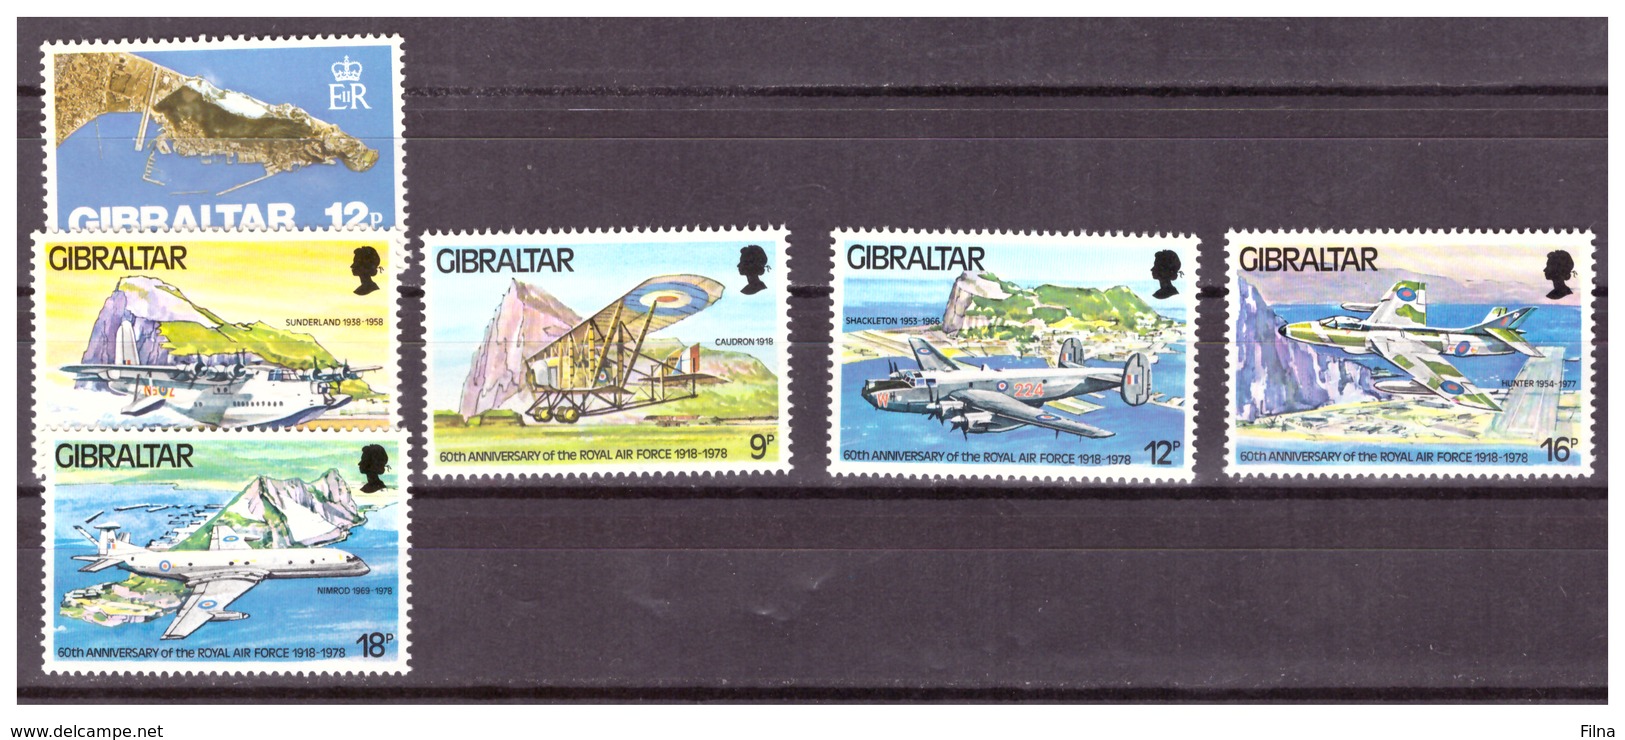 GIBRALTAR -  1978 -  POINT OF EUROPE SEEN FROM SPACE AND R.A.F. 60TH ANNIVERSARY. -  MNH** - Gibraltar